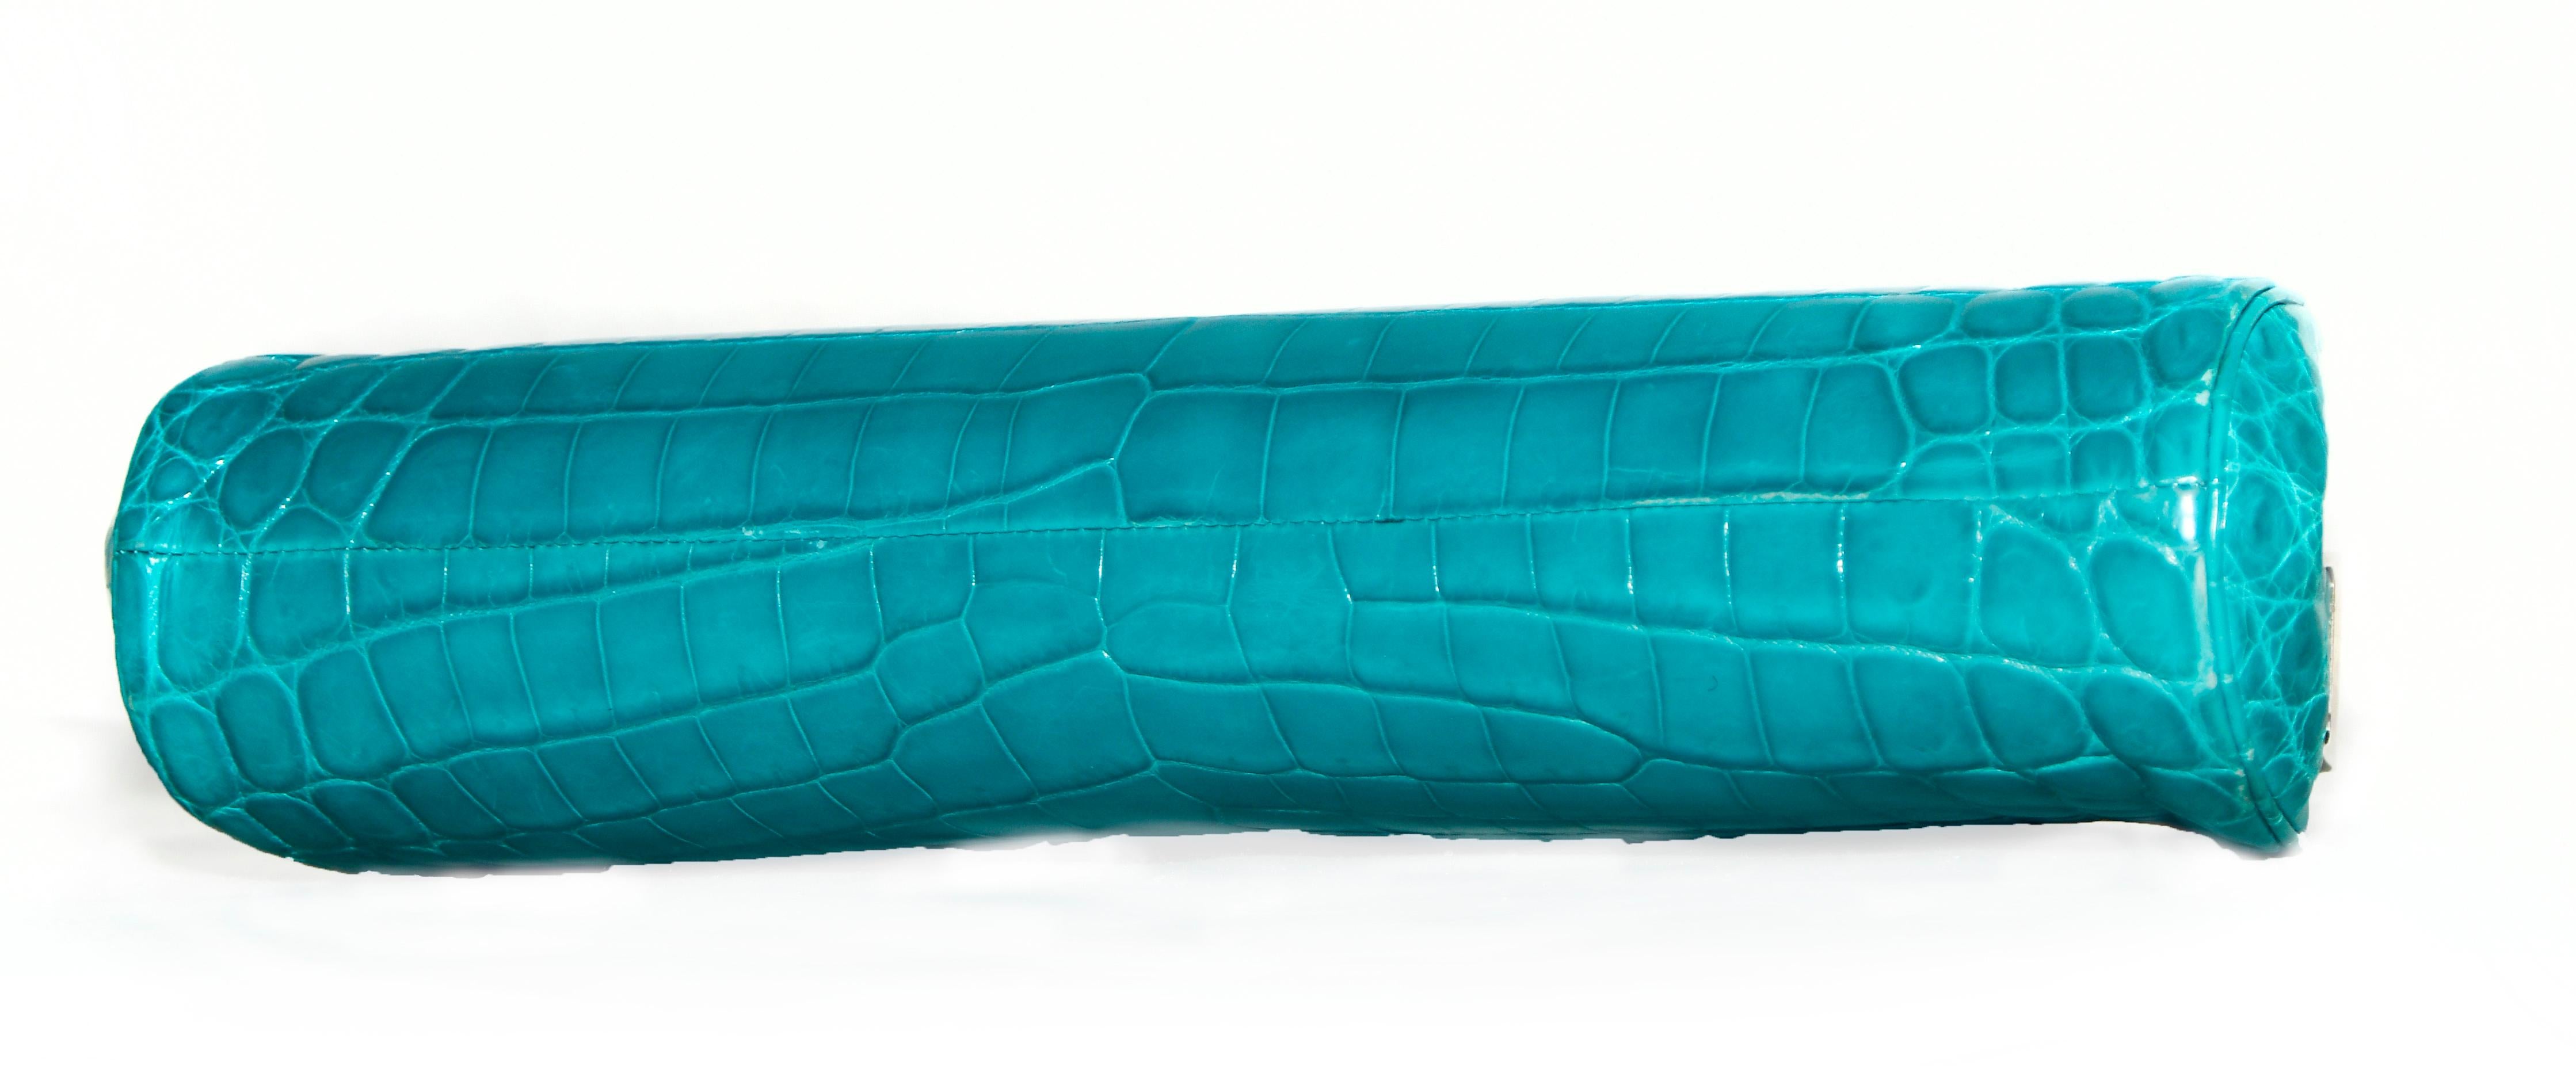 Women's Judith Leiber Turquoise Croc Clutch With Crystal Top Closure For Sale